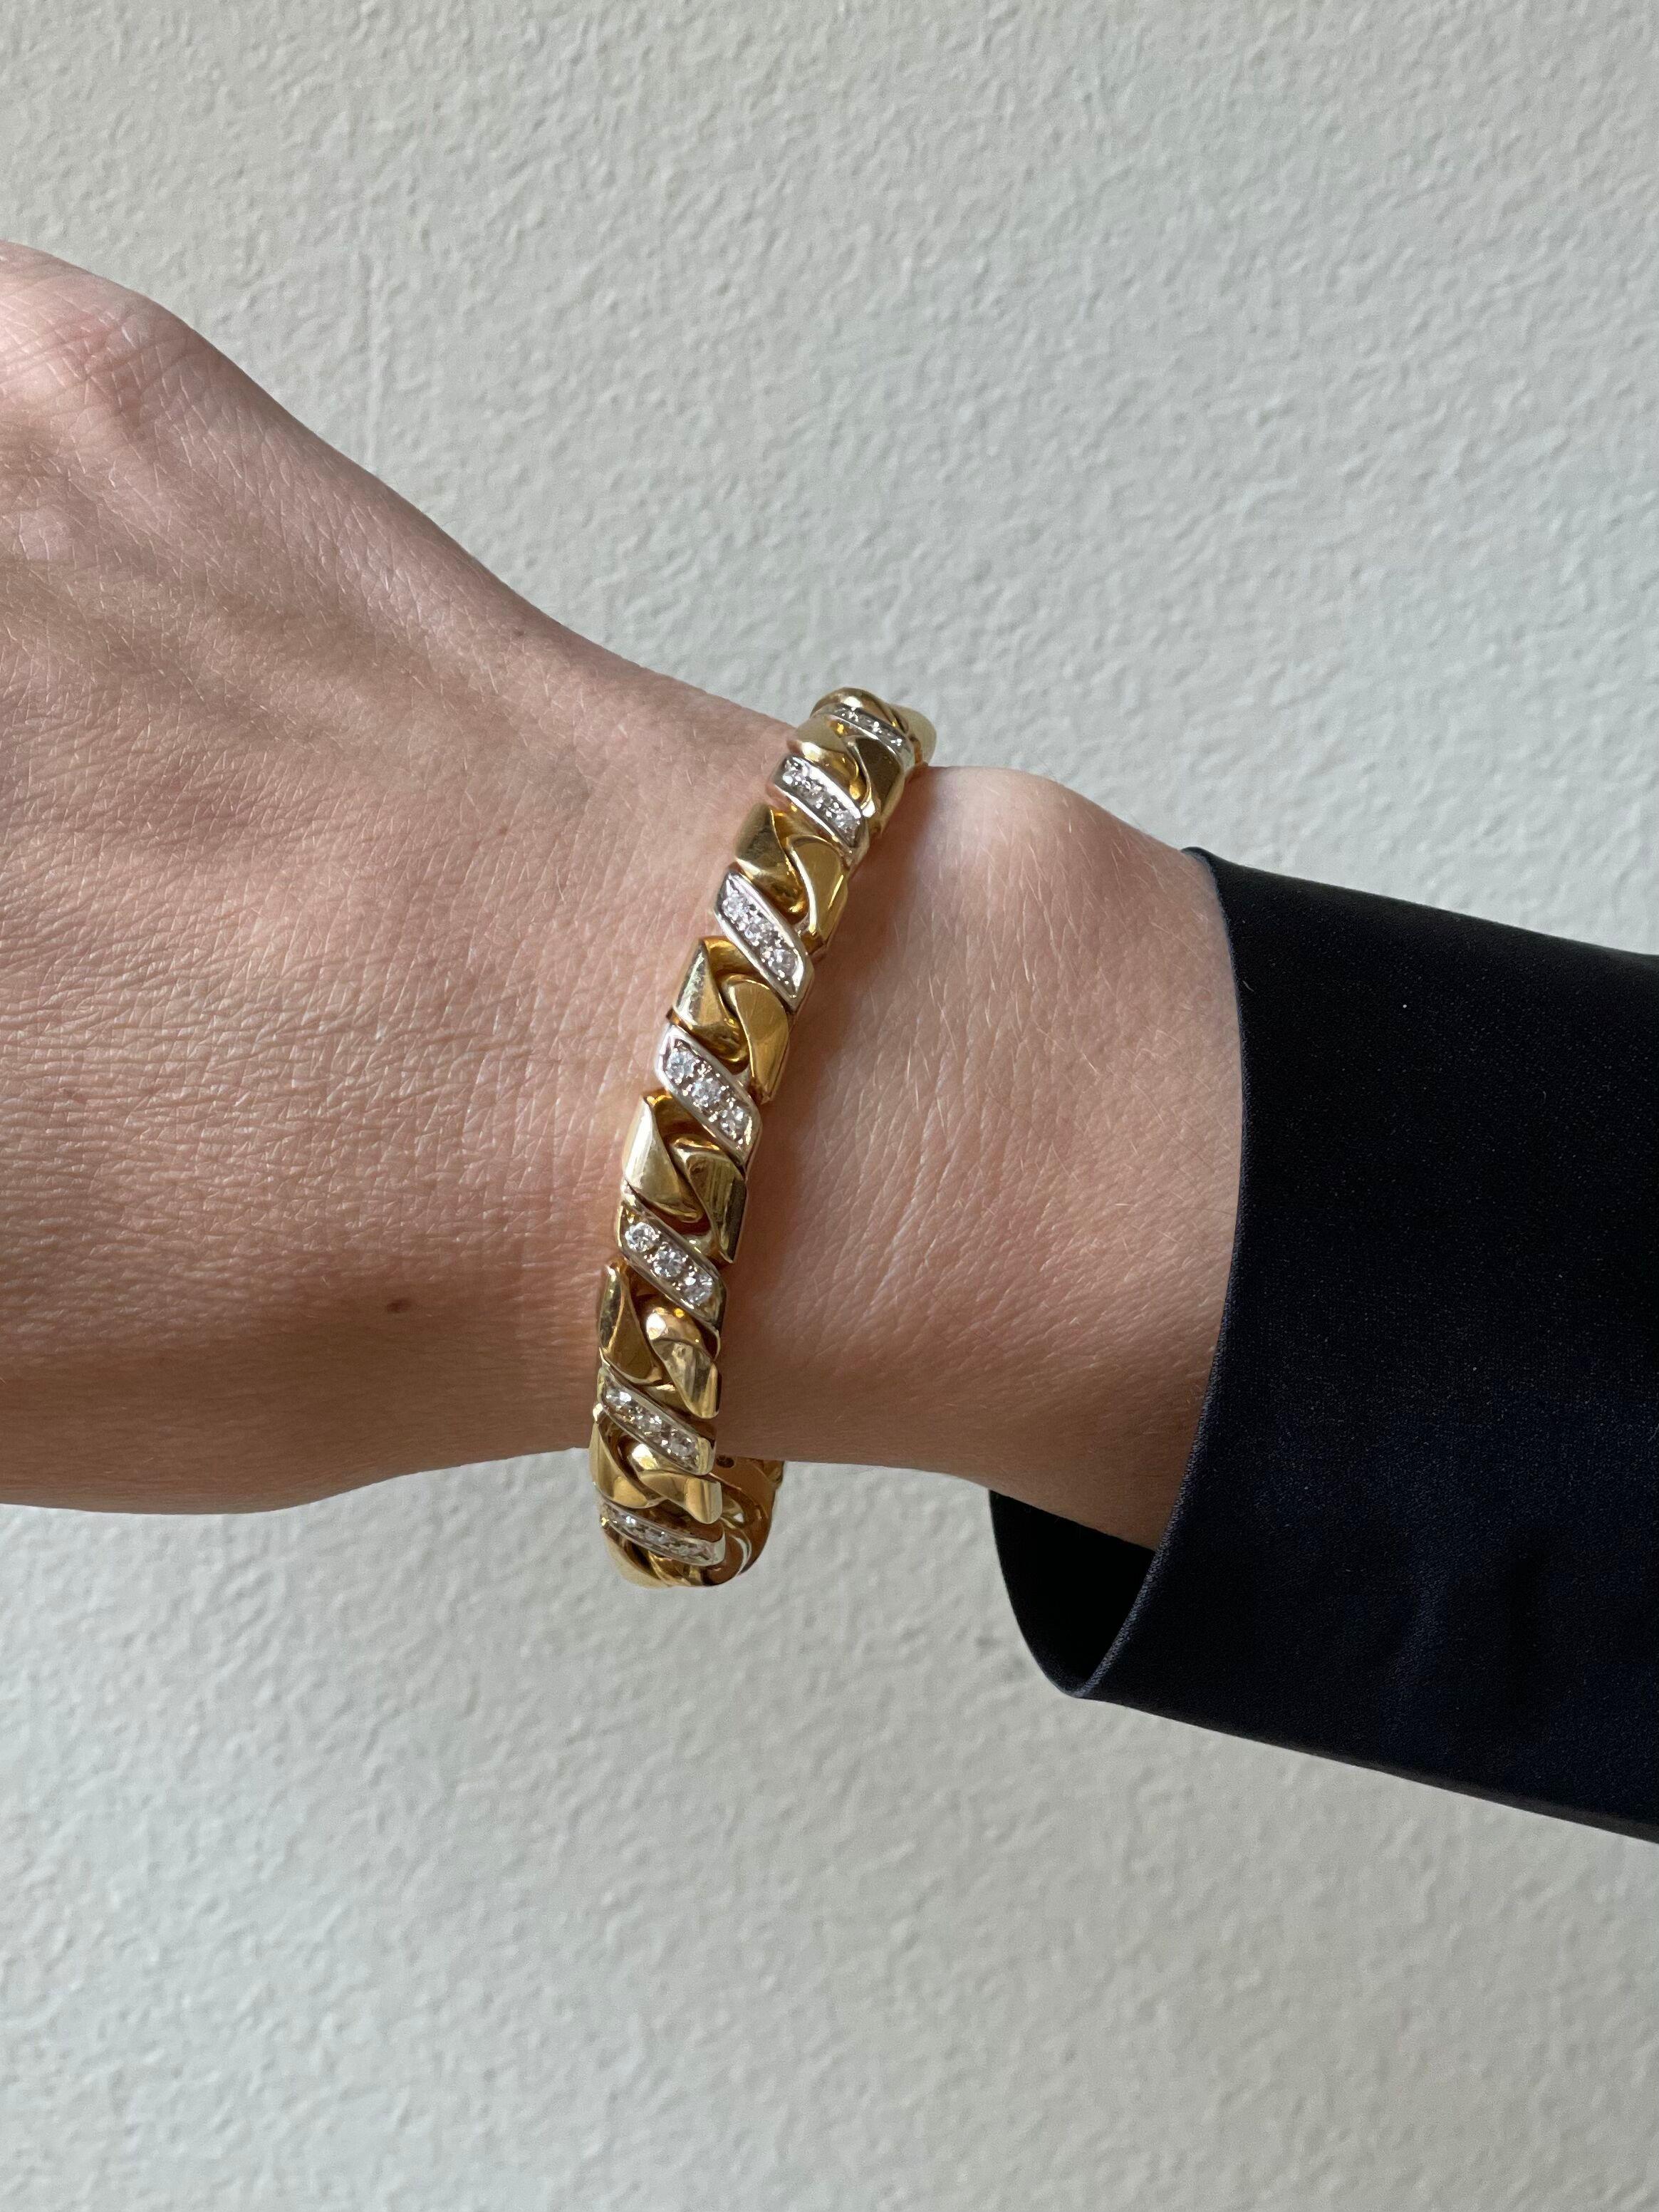 1980s 18k gold curb link bracelet by Bvlgari, with approx. 1.40ctw in H/VS diamonds. Bracelet is 7